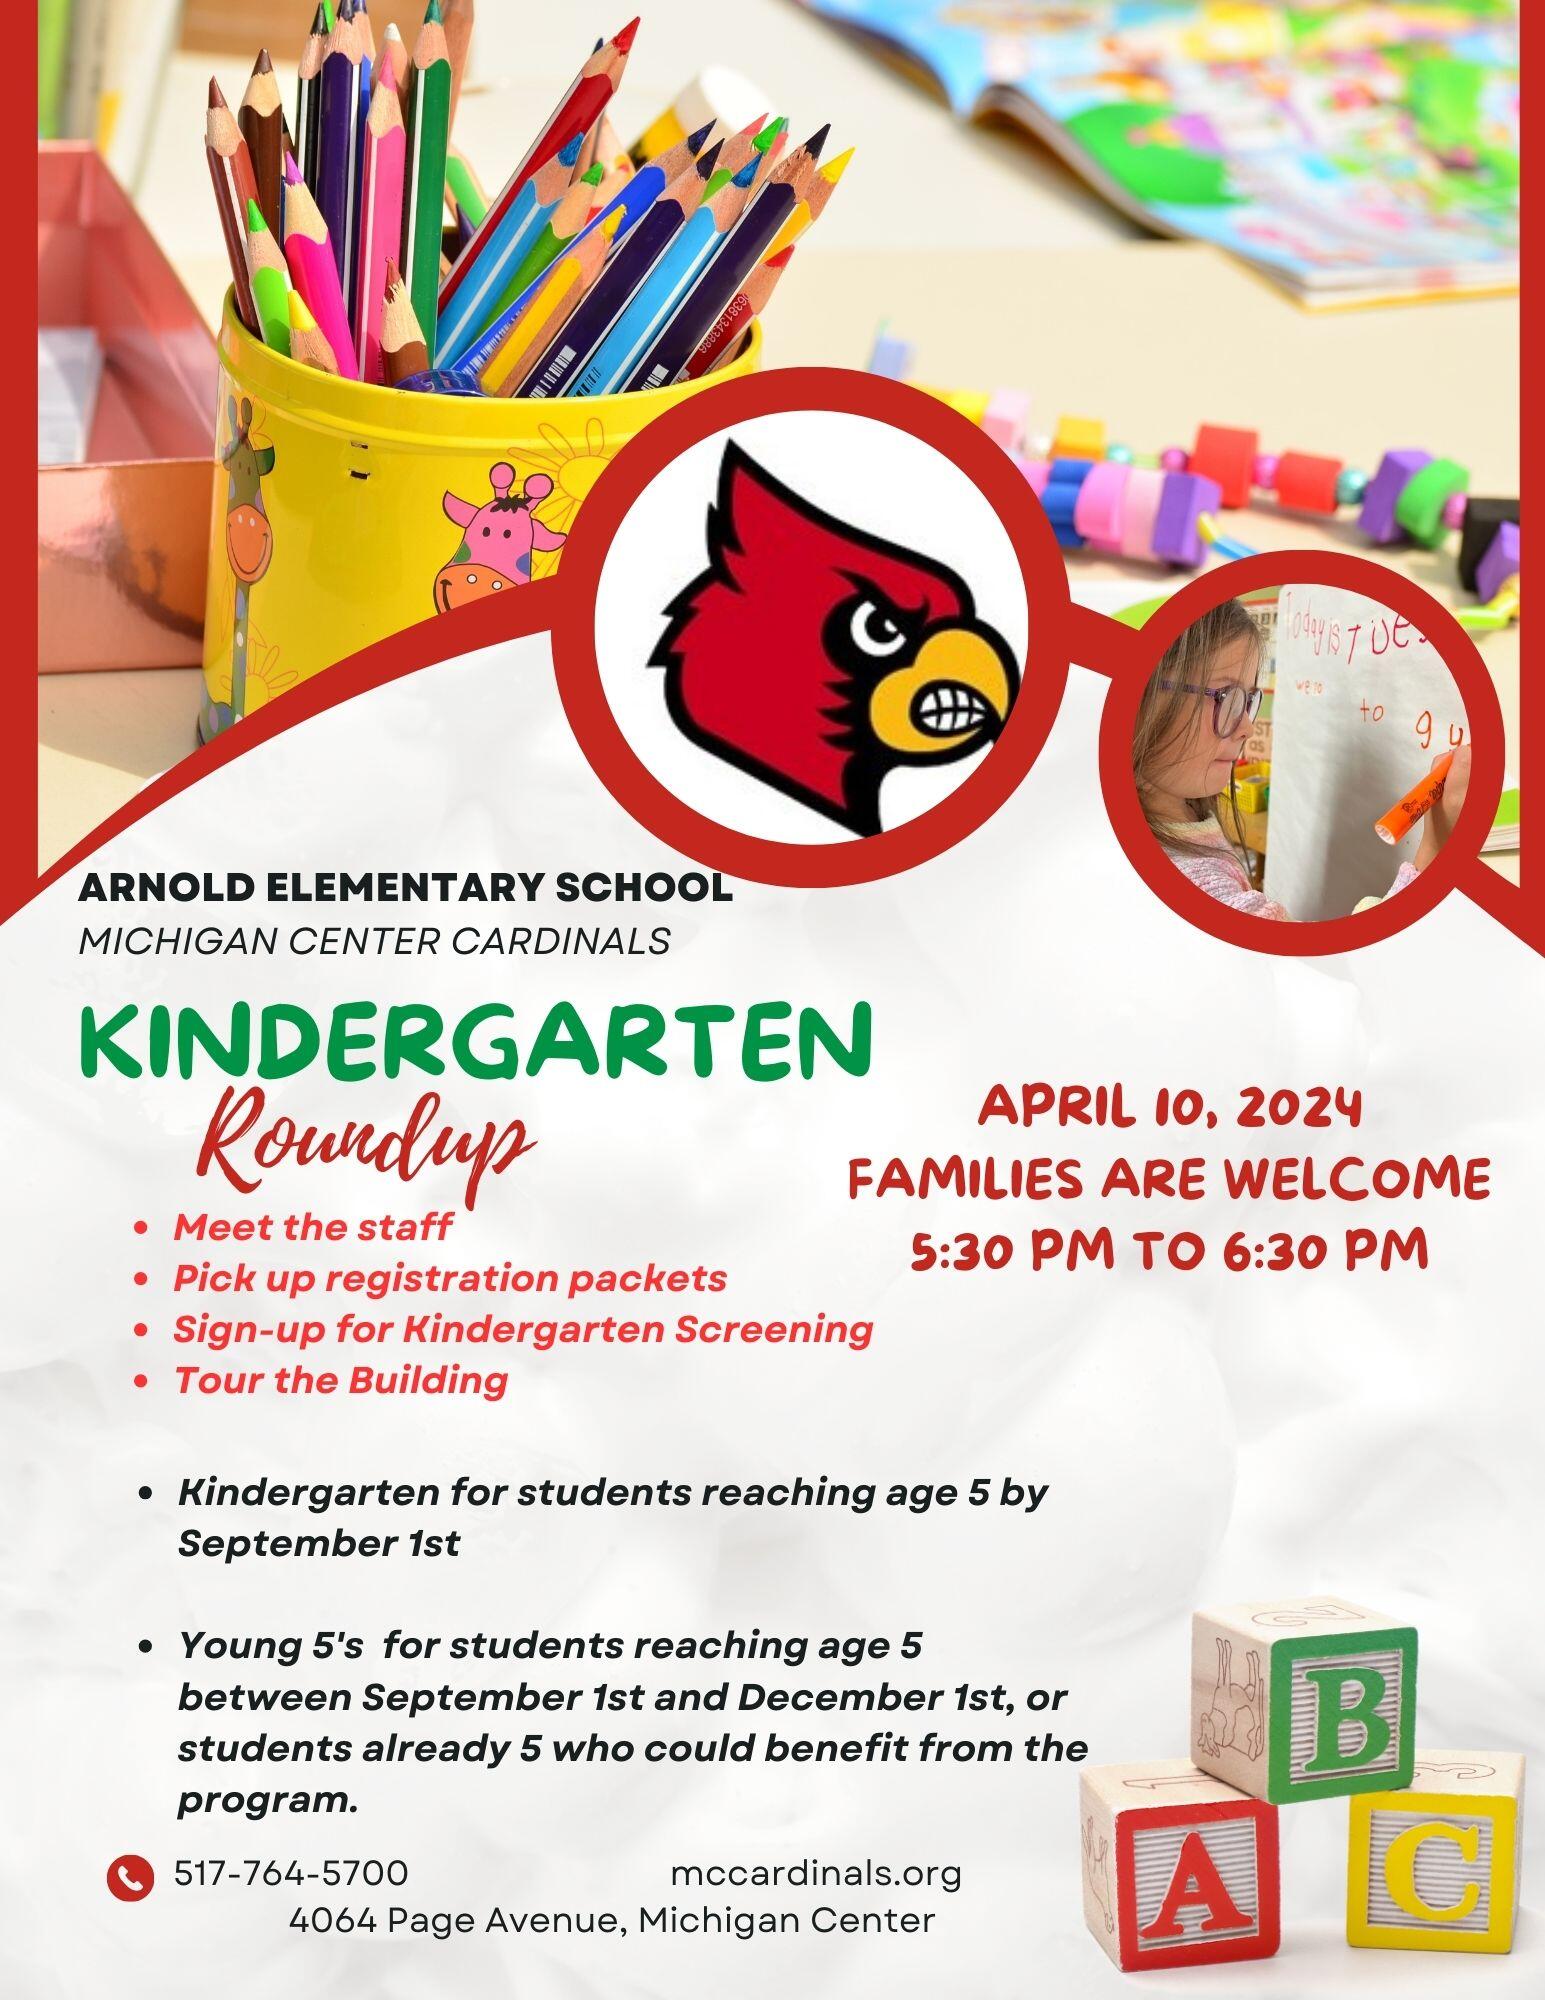 School of choice for kindergarten only is open from May 1st to May 31st.